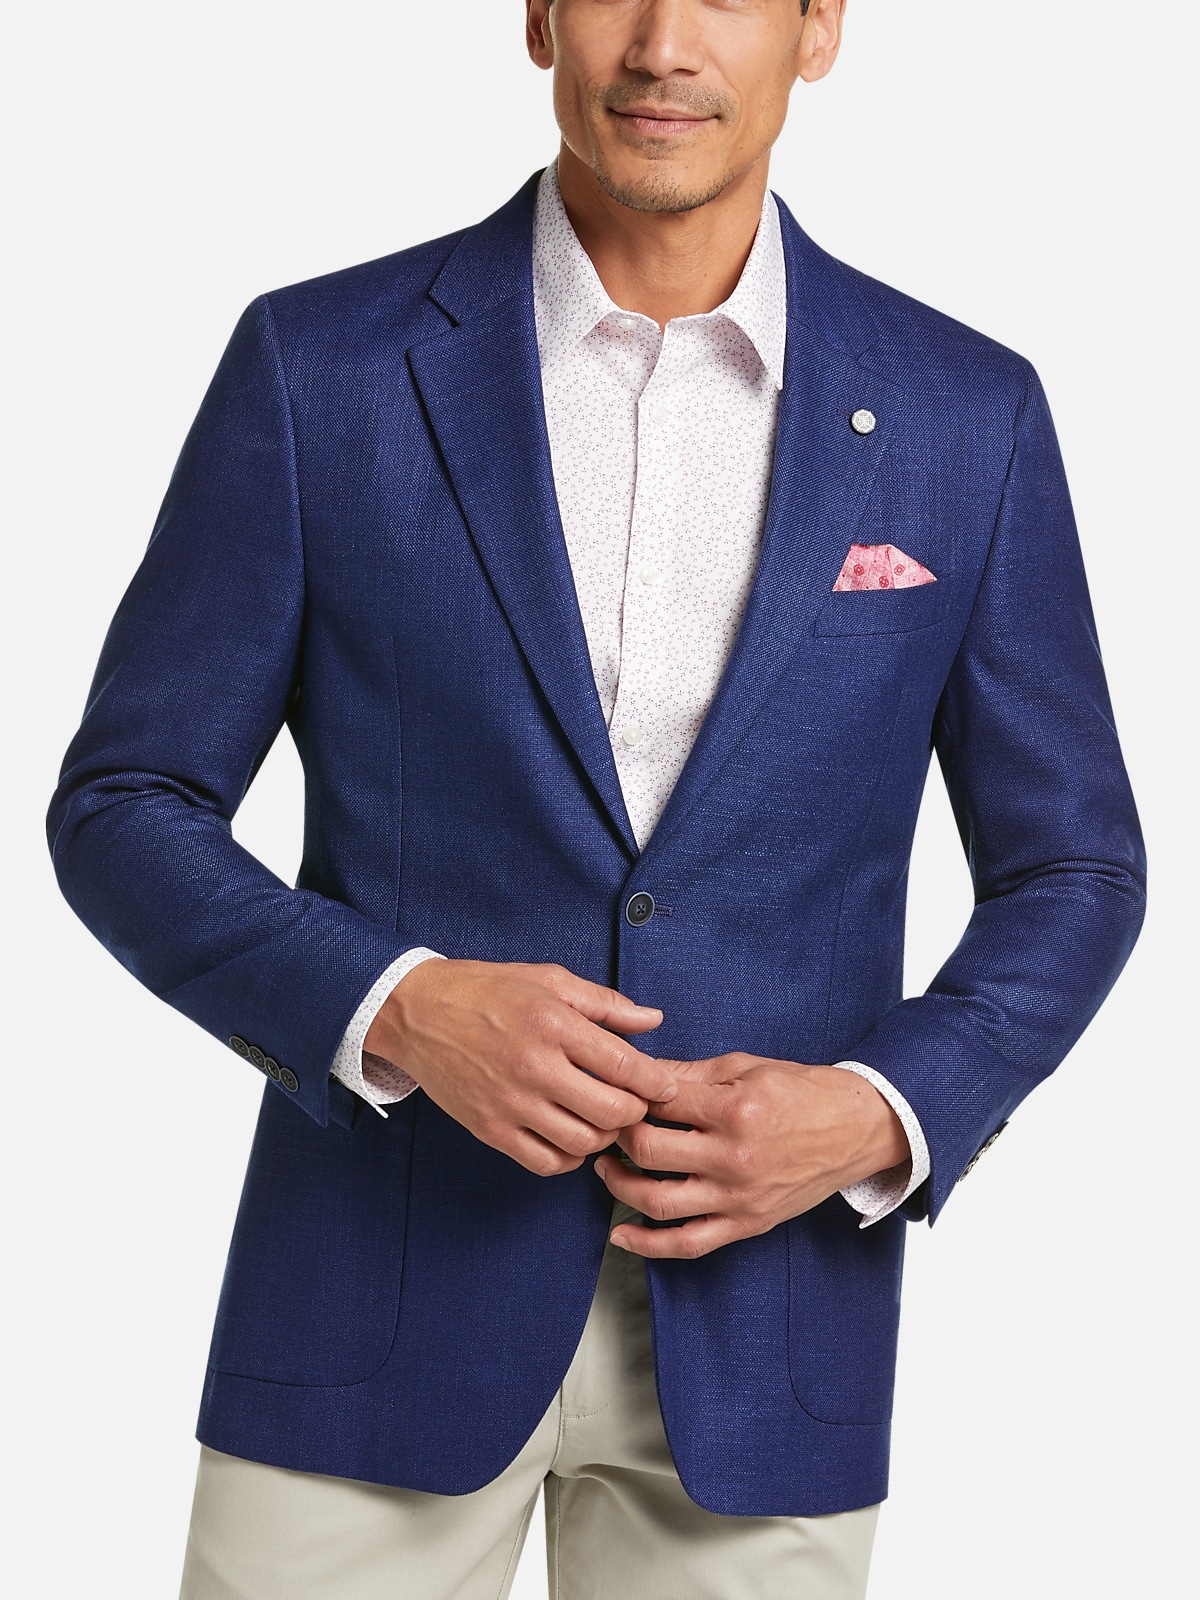 https://image.menswearhouse.com/is/image/TMW/TMW_15P8_01_NAUTICA_SPORT_COATS_NAVY_MAIN?imPolicy=pdp-zoom-mob